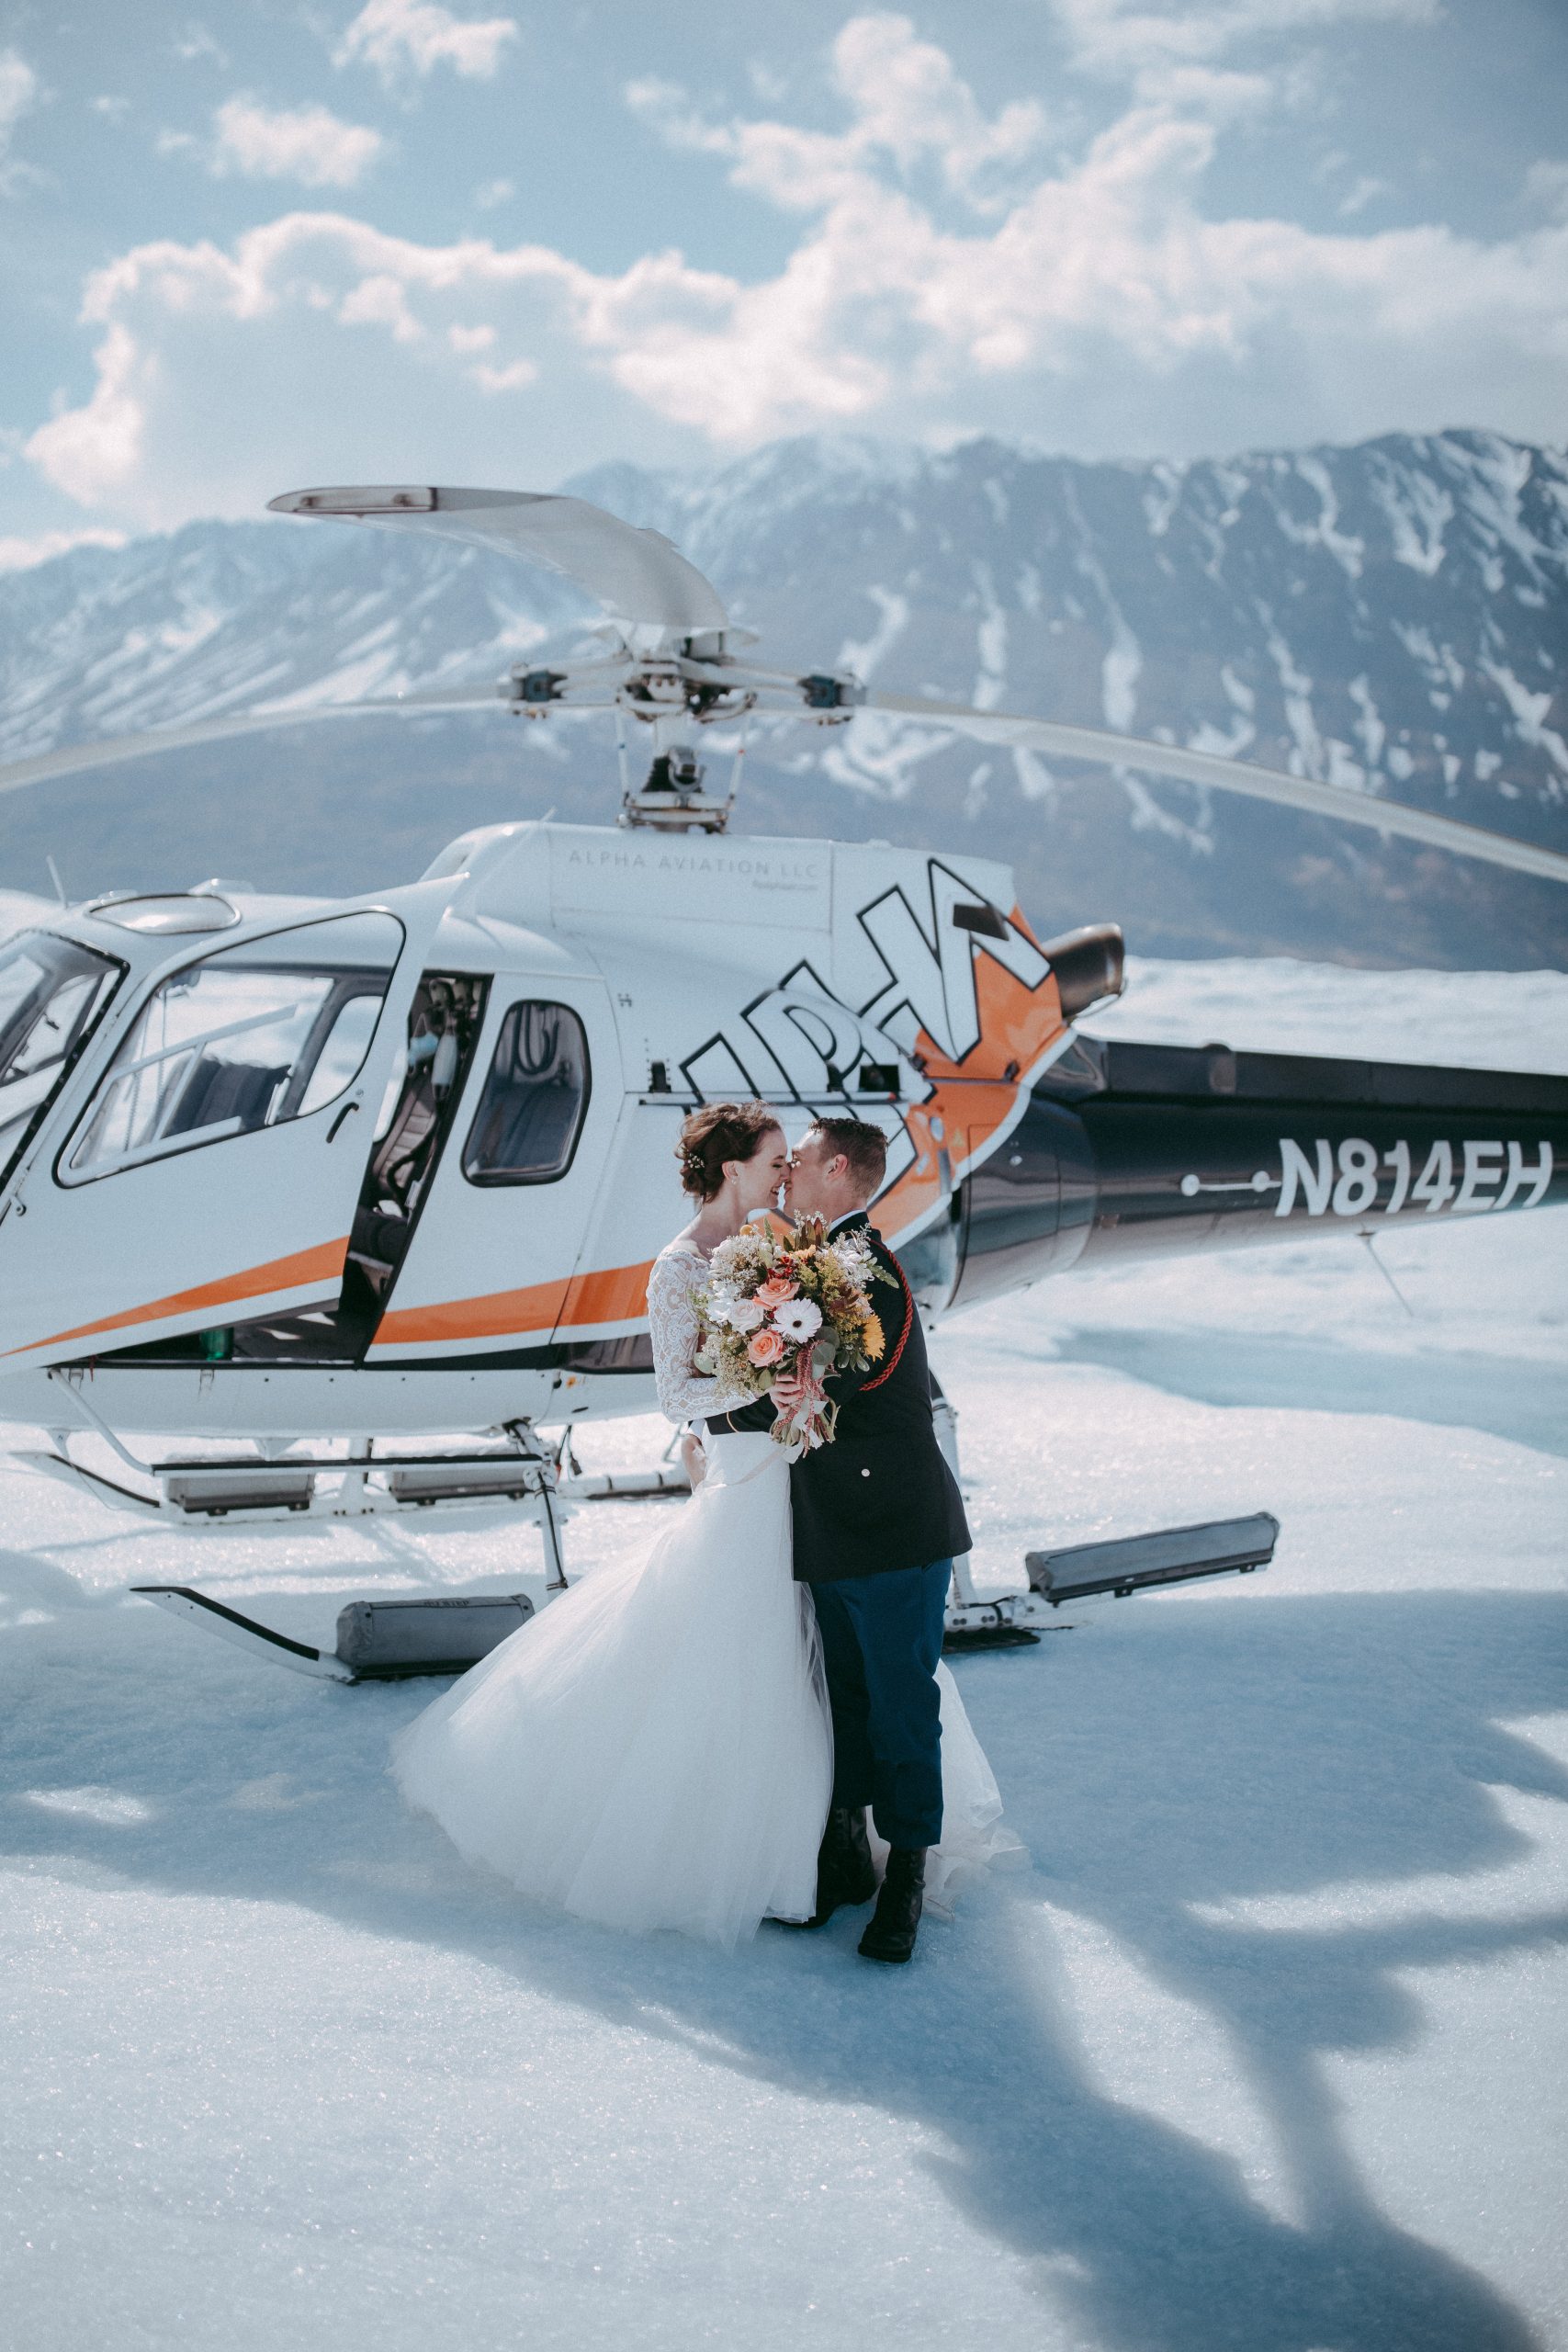 Groom with Real Bride Getting Married on Glacier in Alaska in Romantic Destination Wedding with Helicopter Behind Them